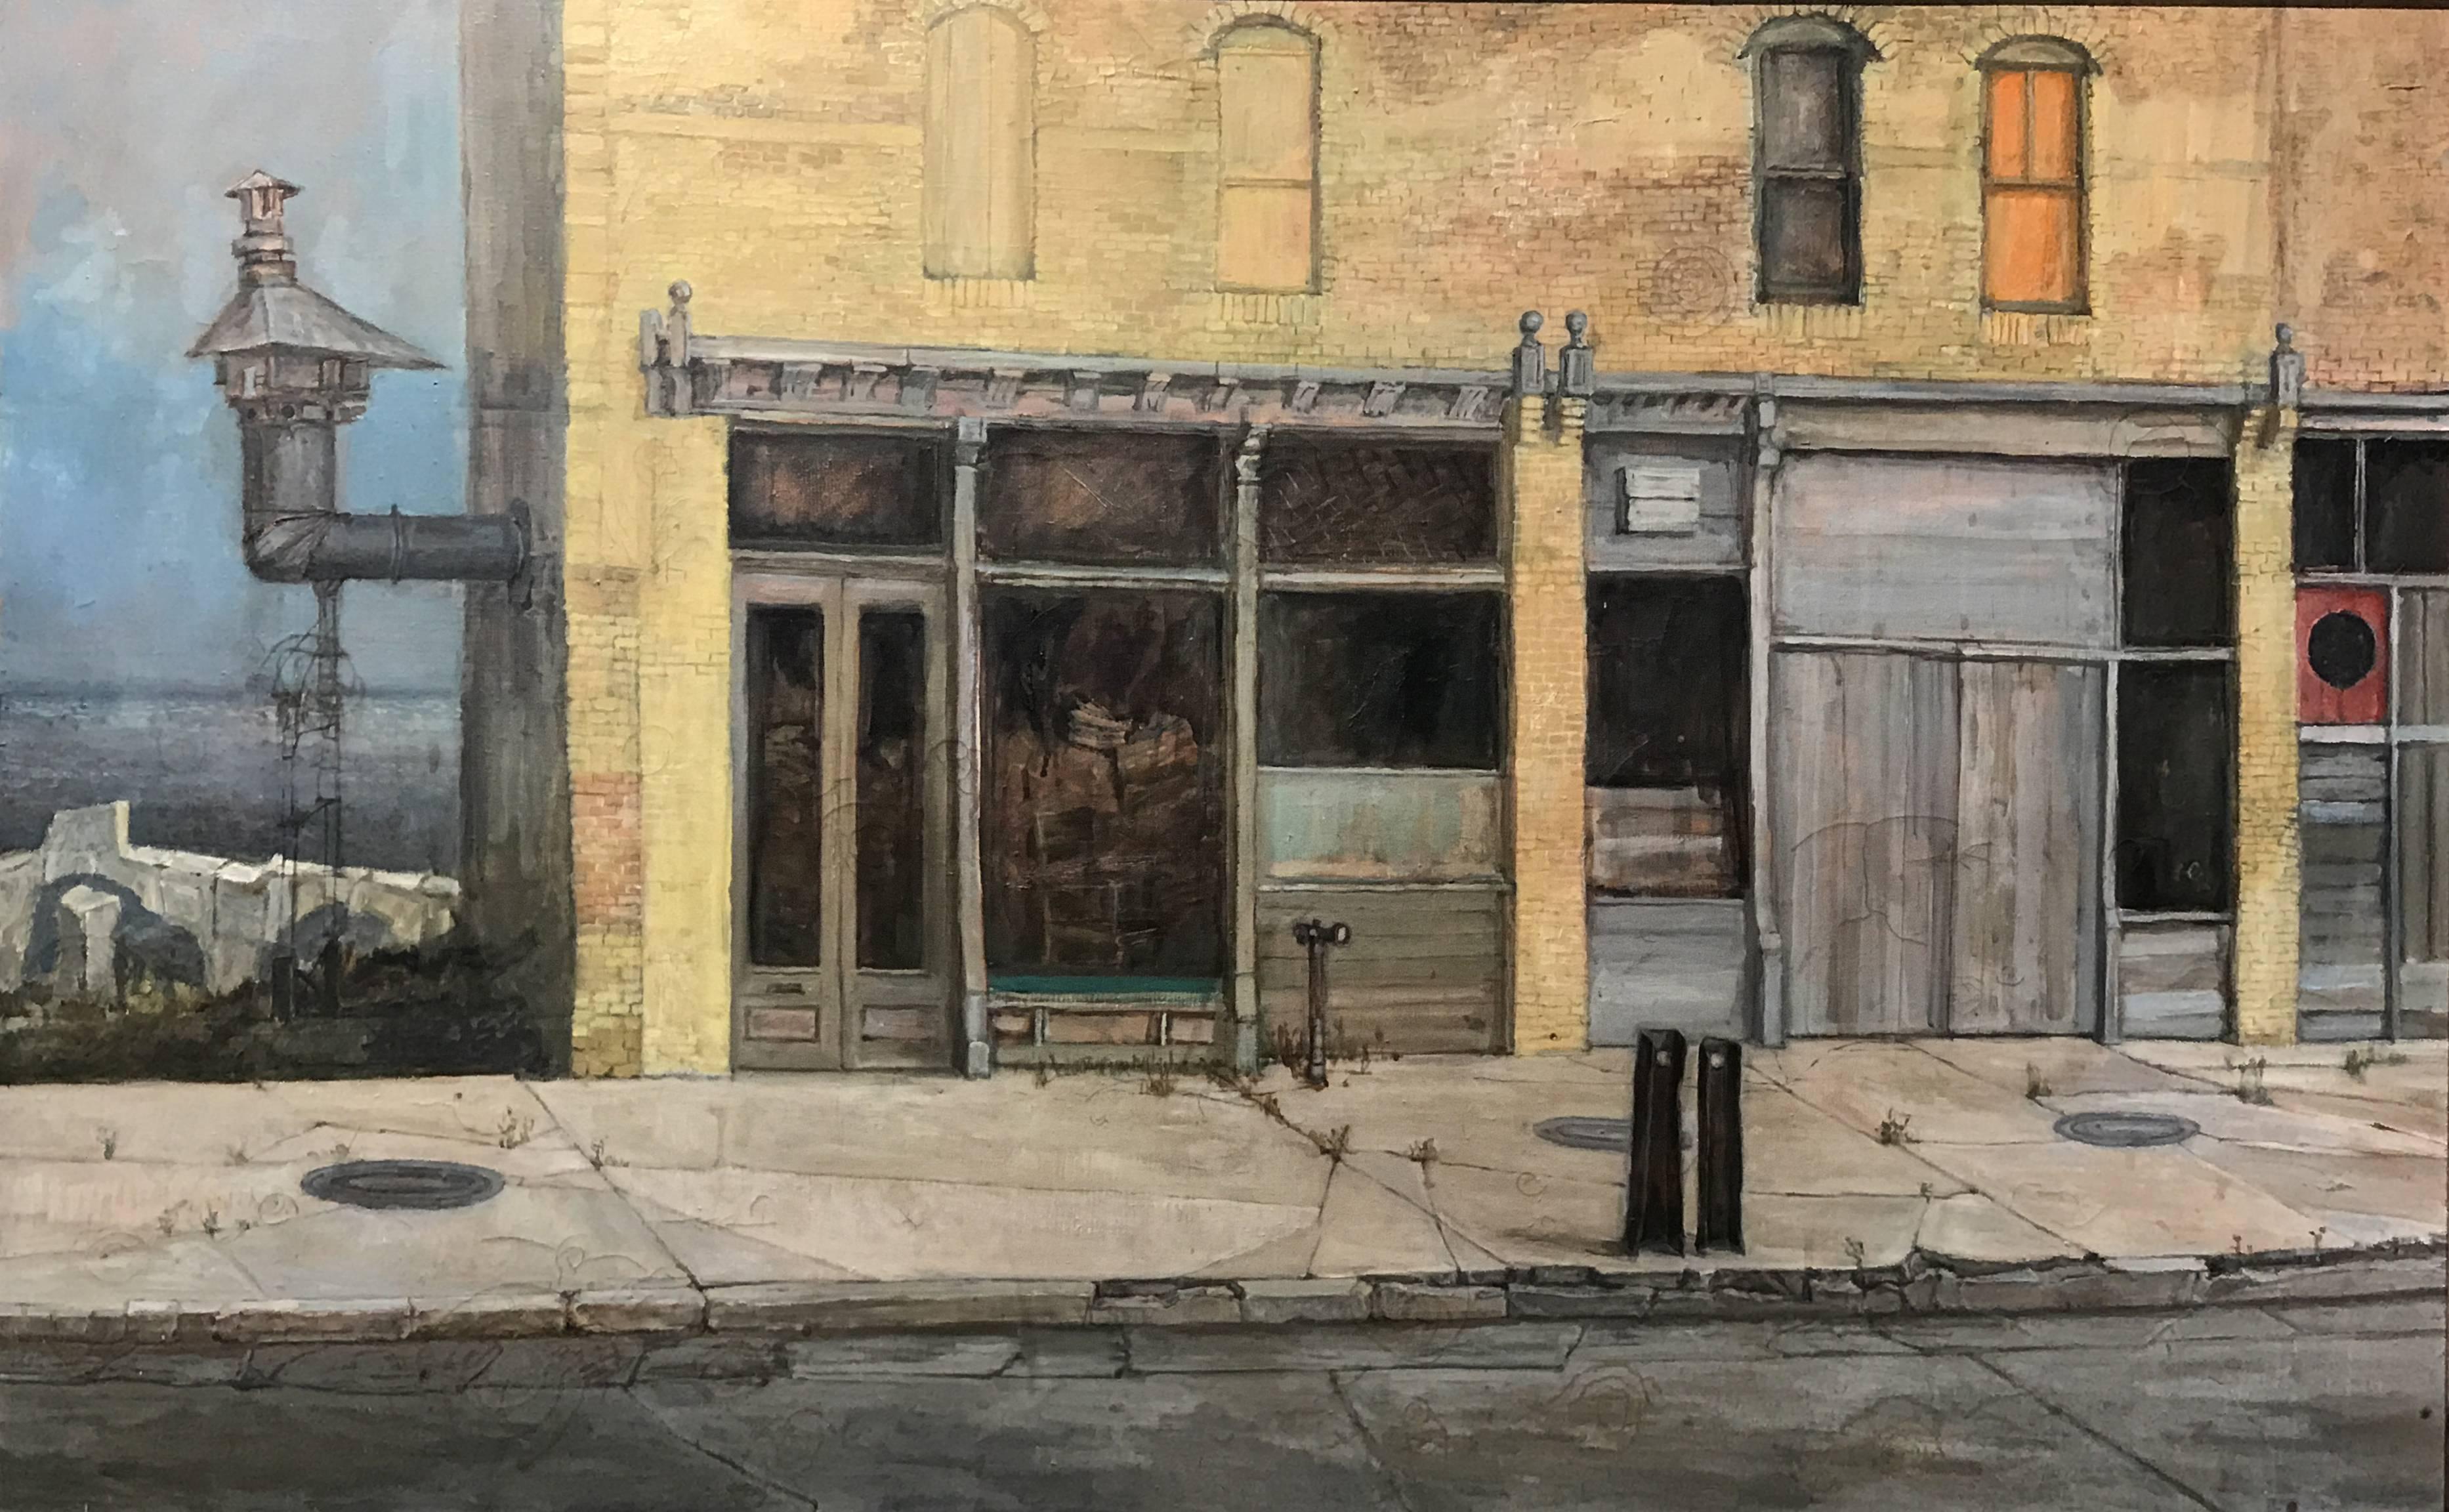 A fine large Ashcan School oil painting of a street scene with abandoned brick storefronts typical of the backstreets of any American city. The Ashcan School developed from a group of New York artists in the early 20th century, inspired by the works